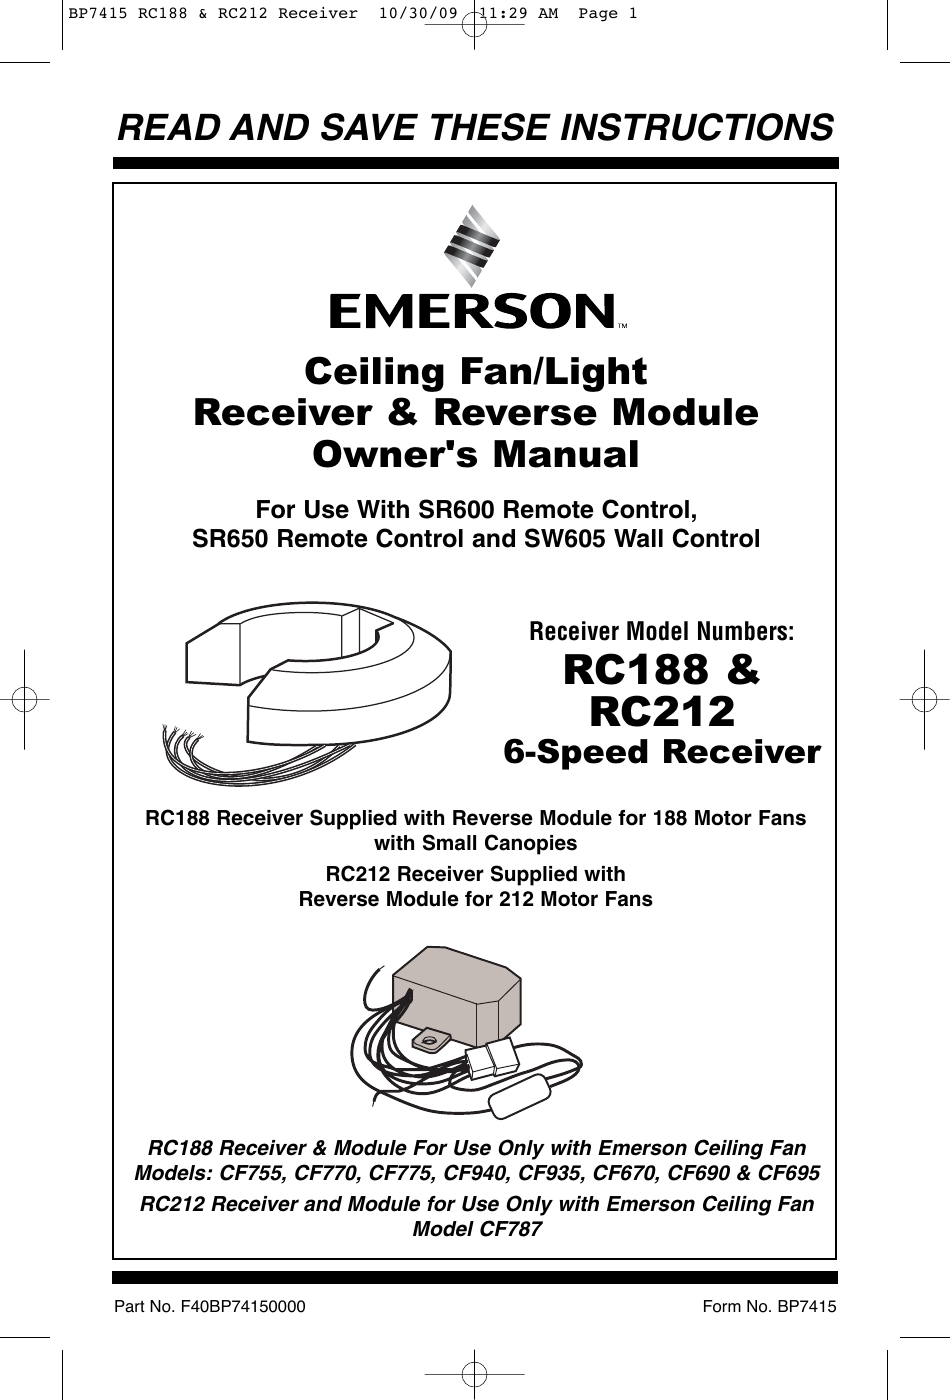 Emerson Rc188 Owners Manual Bp7415 Rc212 Receiver